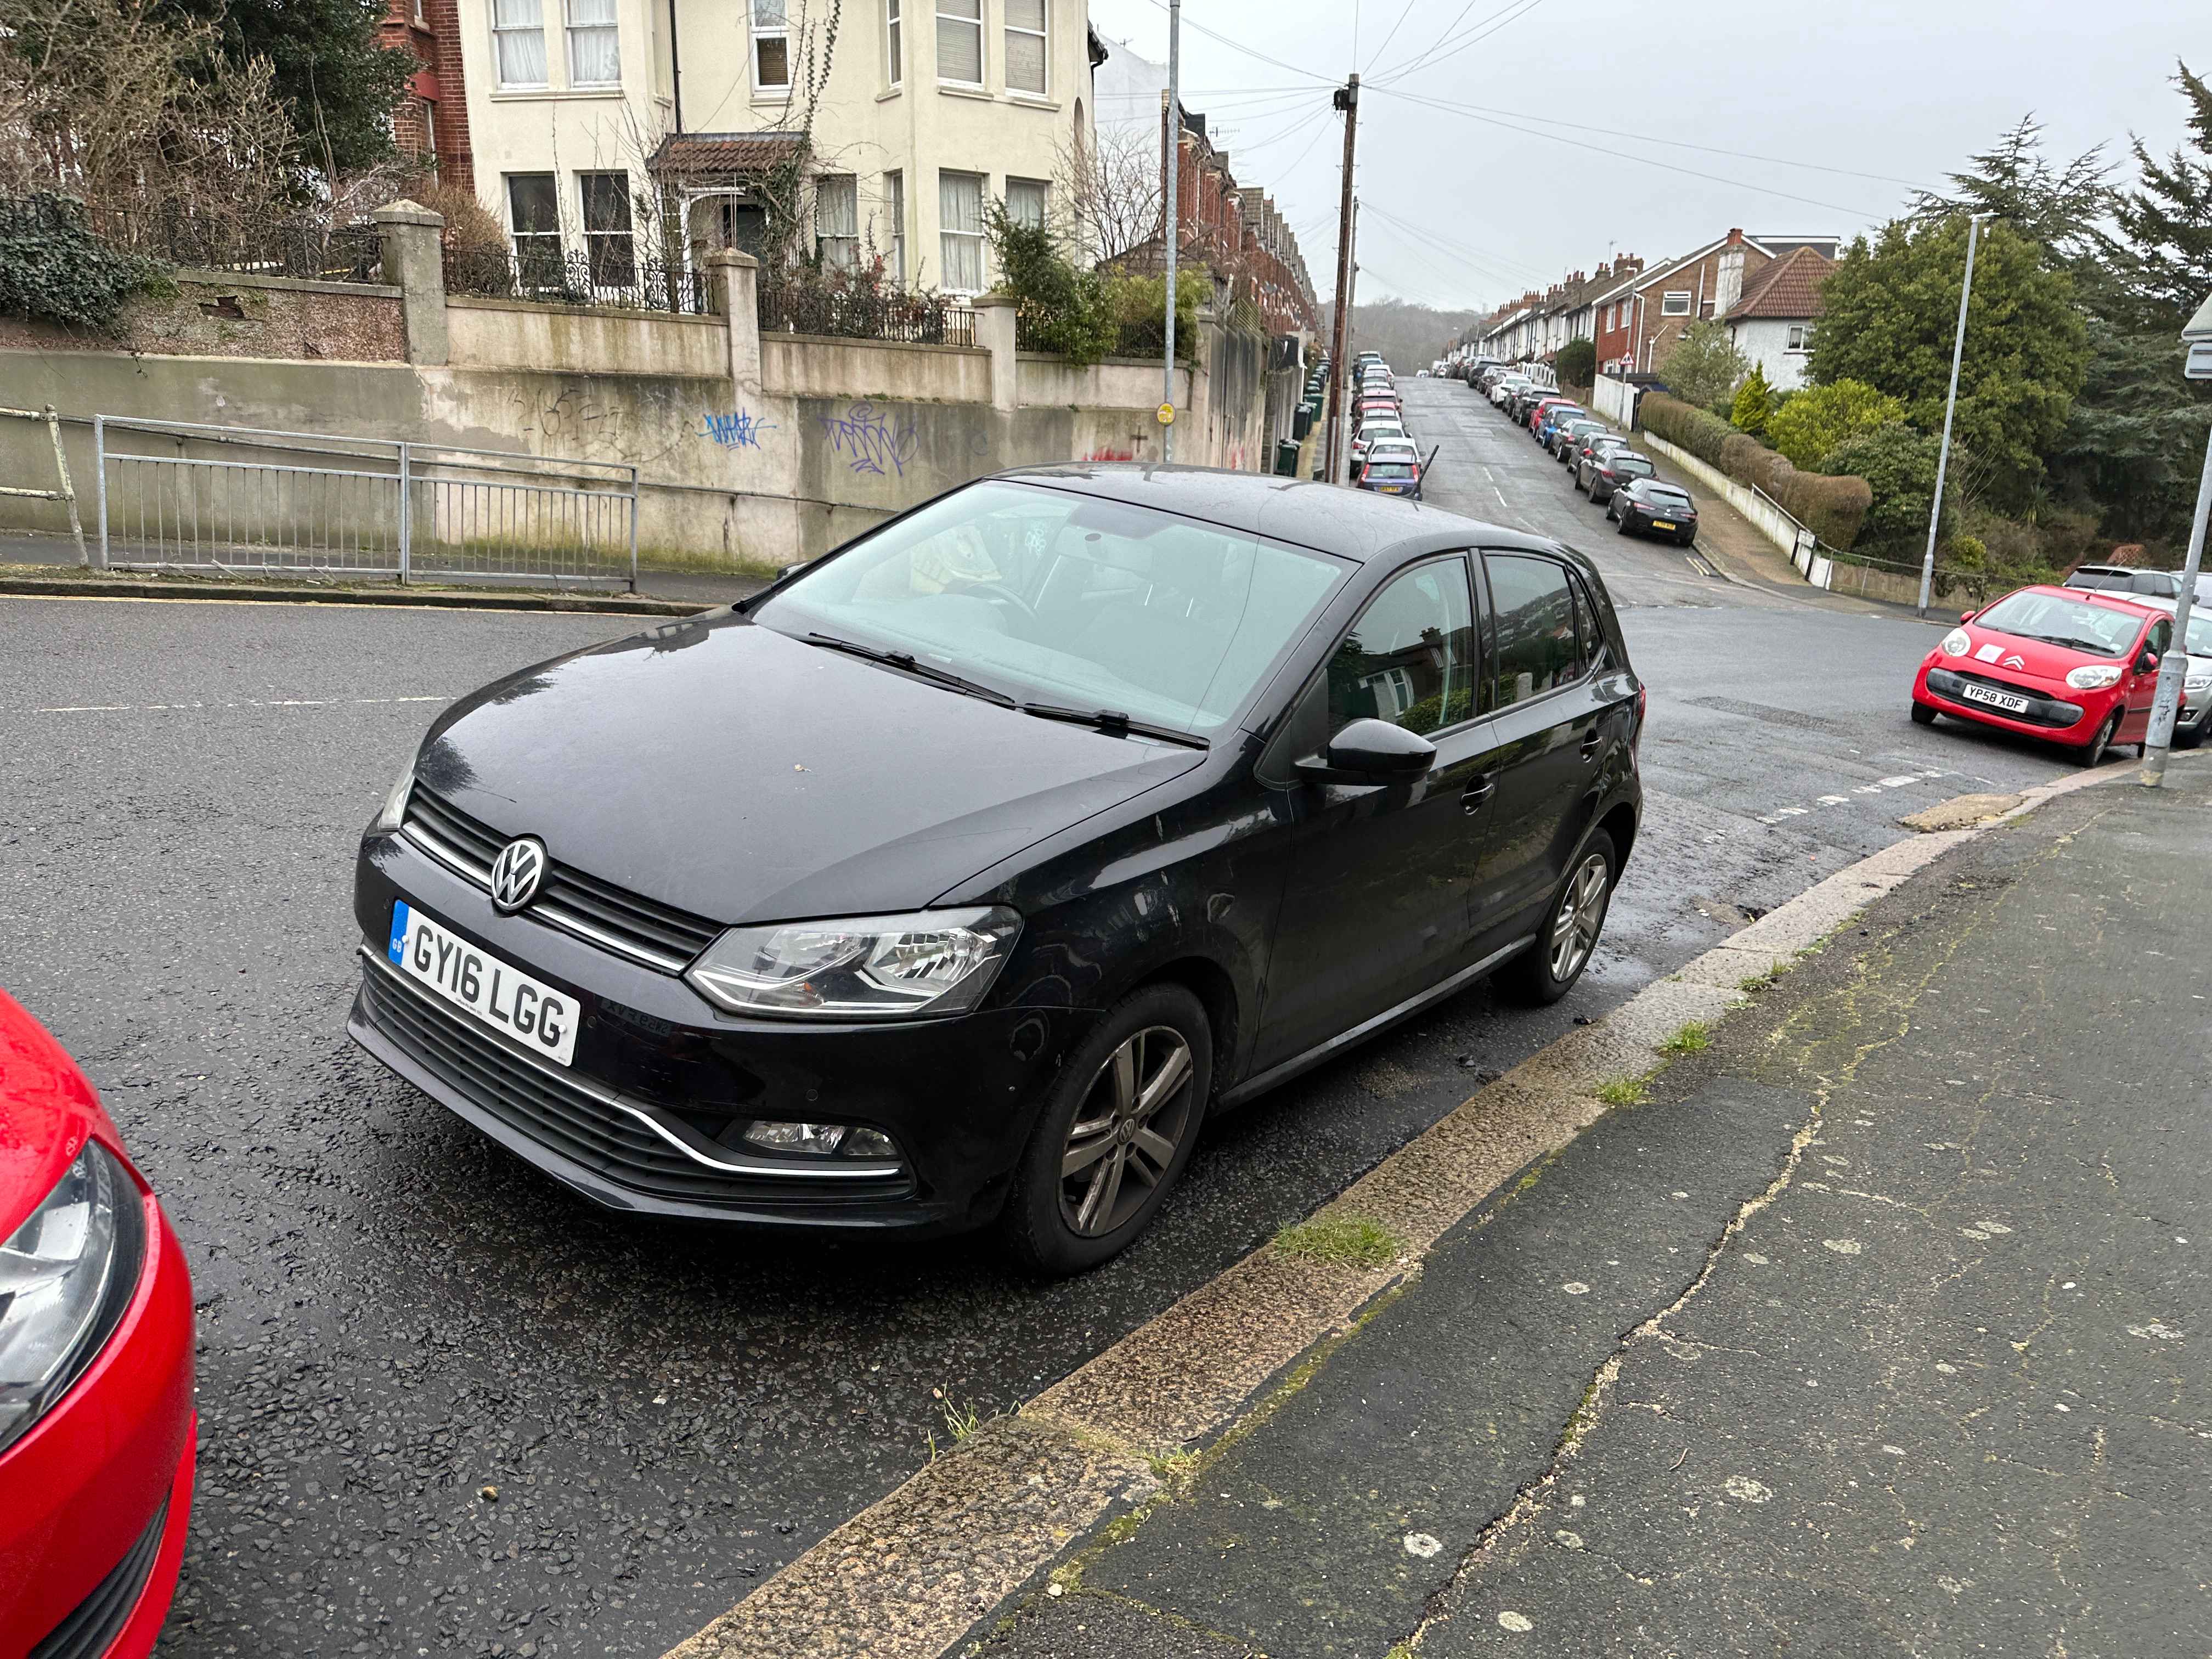 Photograph of GY16 LGG - a Black Volkswagen Polo parked in Hollingdean by a non-resident. The fifth of five photographs supplied by the residents of Hollingdean.